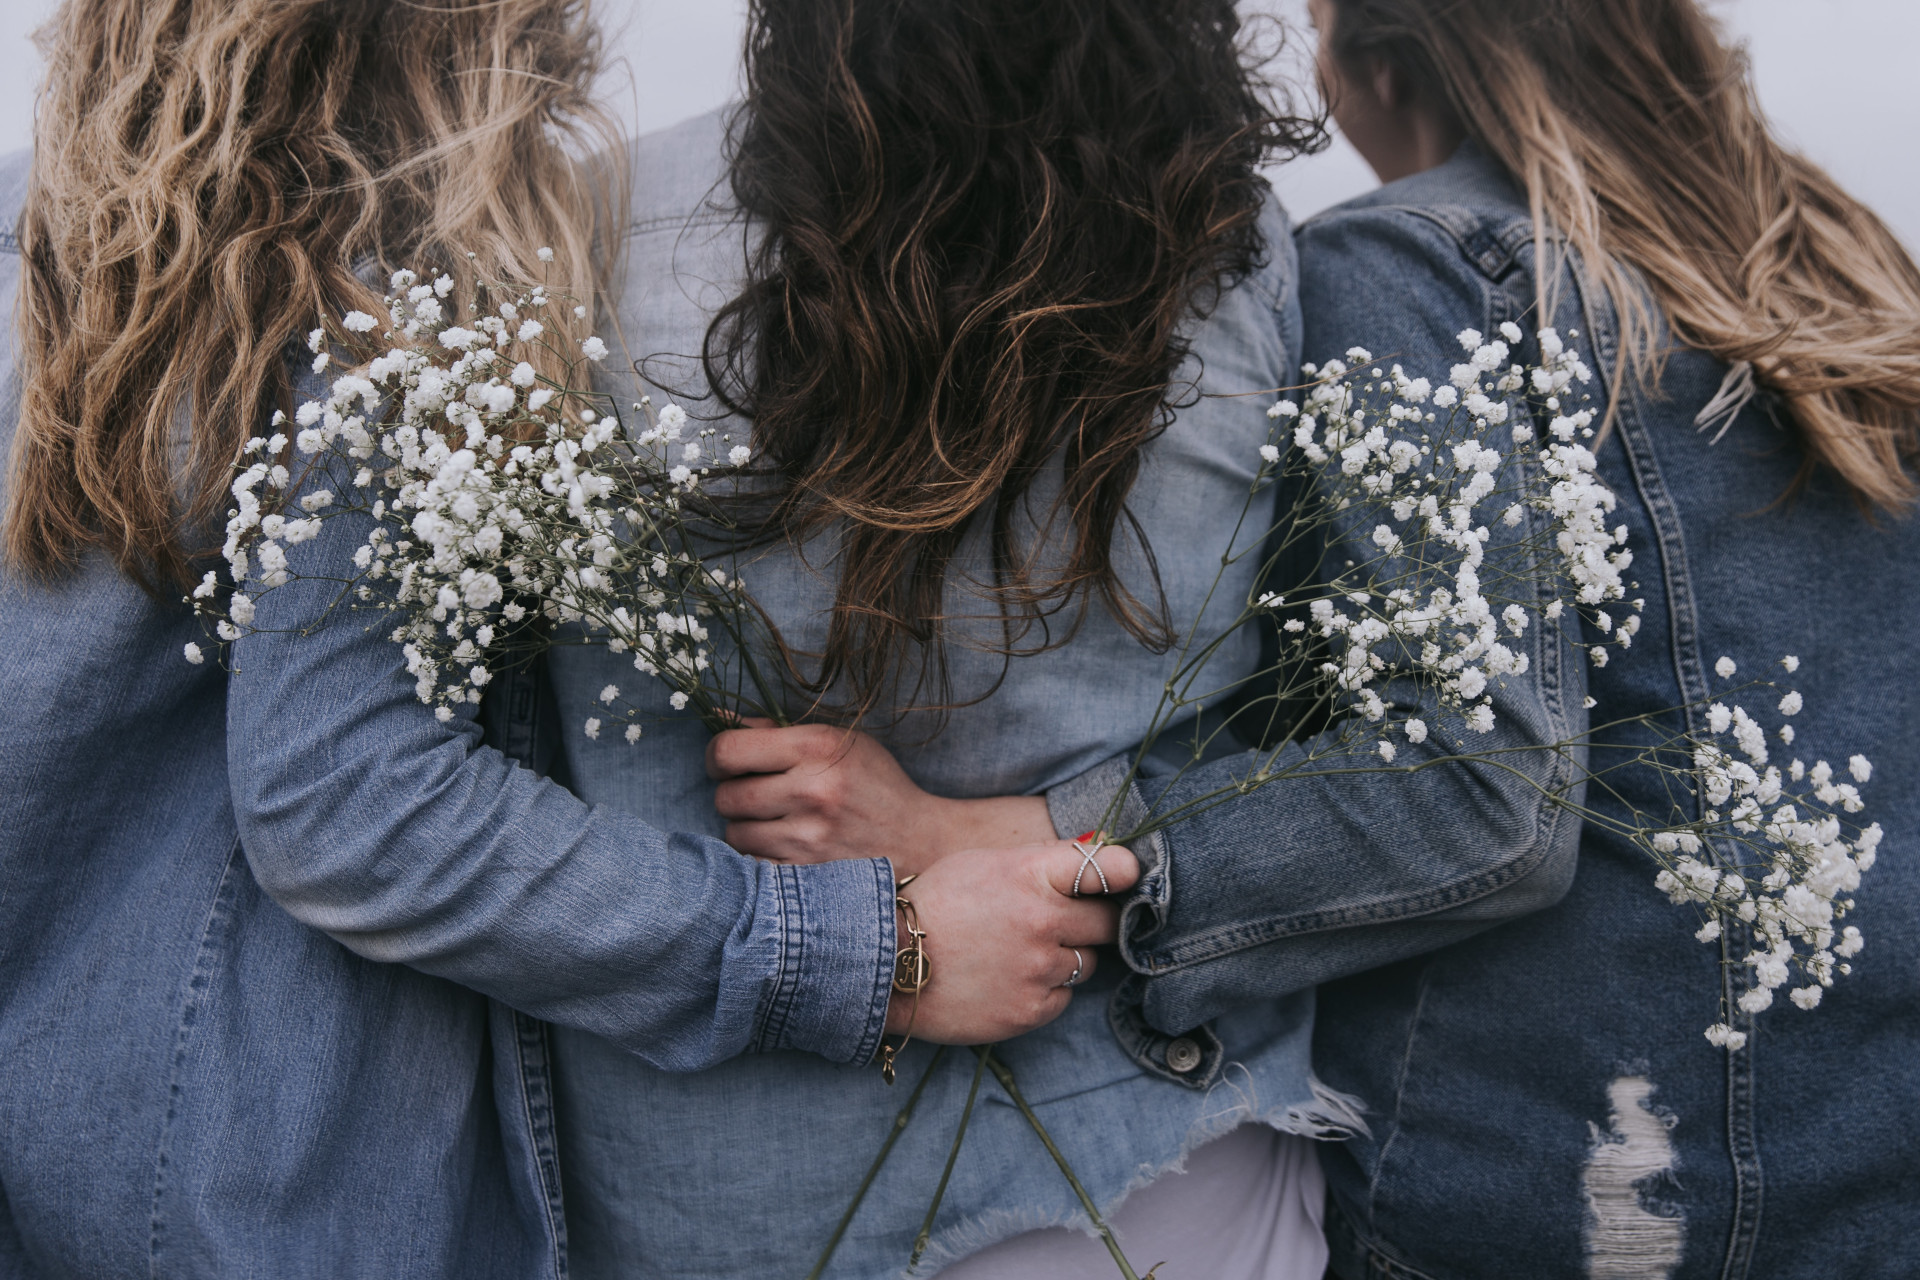 Close up of three women's backs, wearing denim jackets and holding flowers